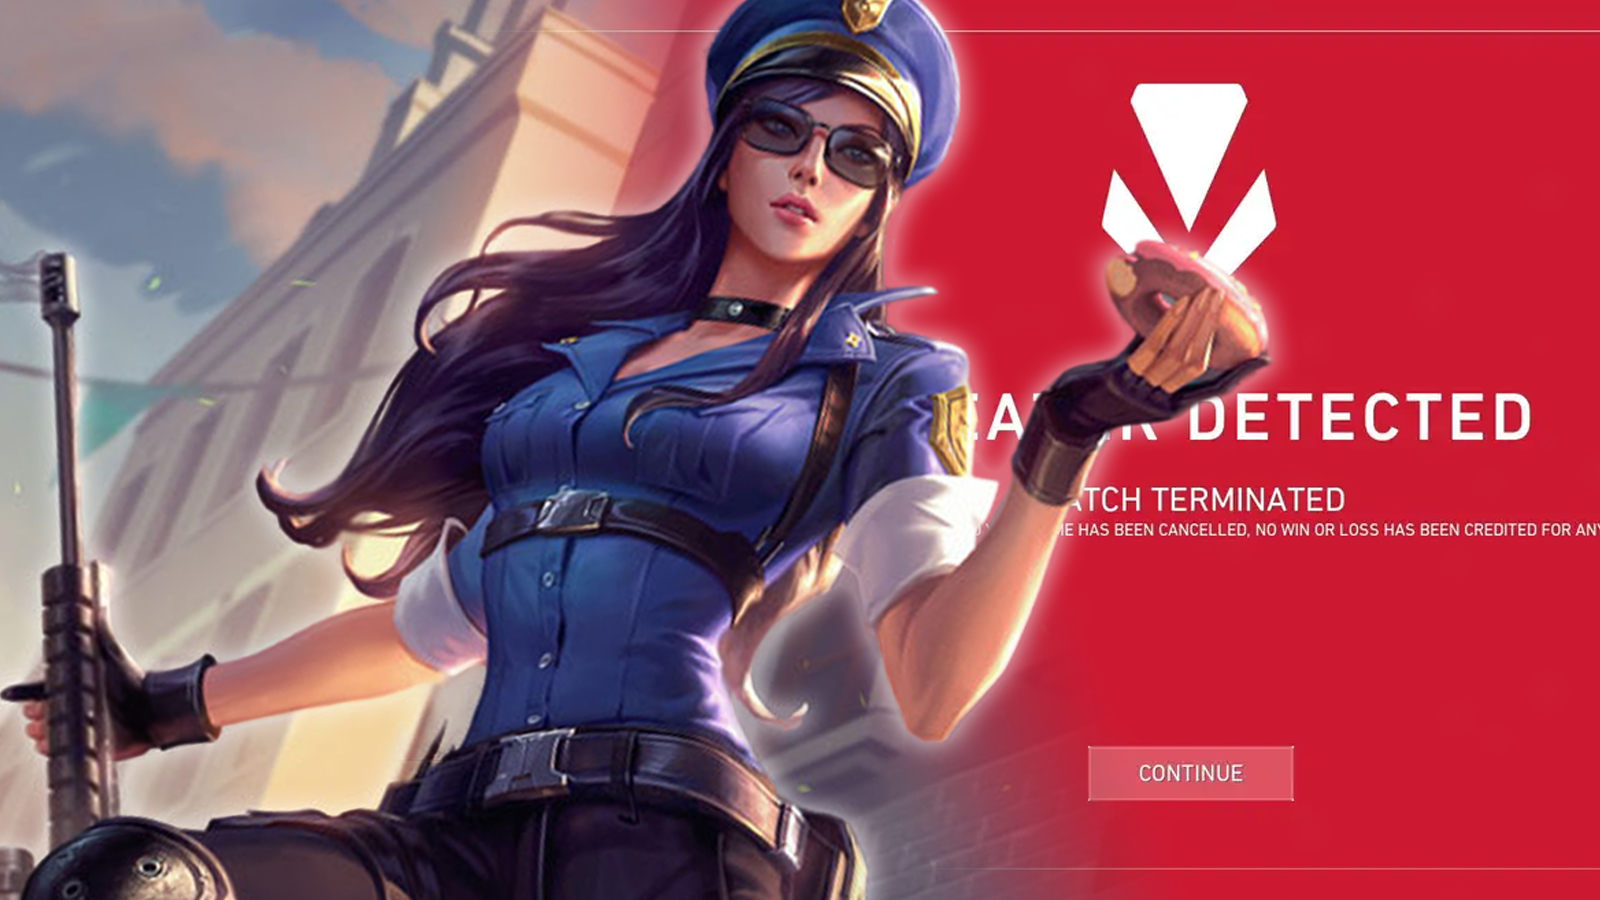 Vanguard has finally arrived in League of Legends, and nearly immediately the online community has been awash with players claiming their computers ha